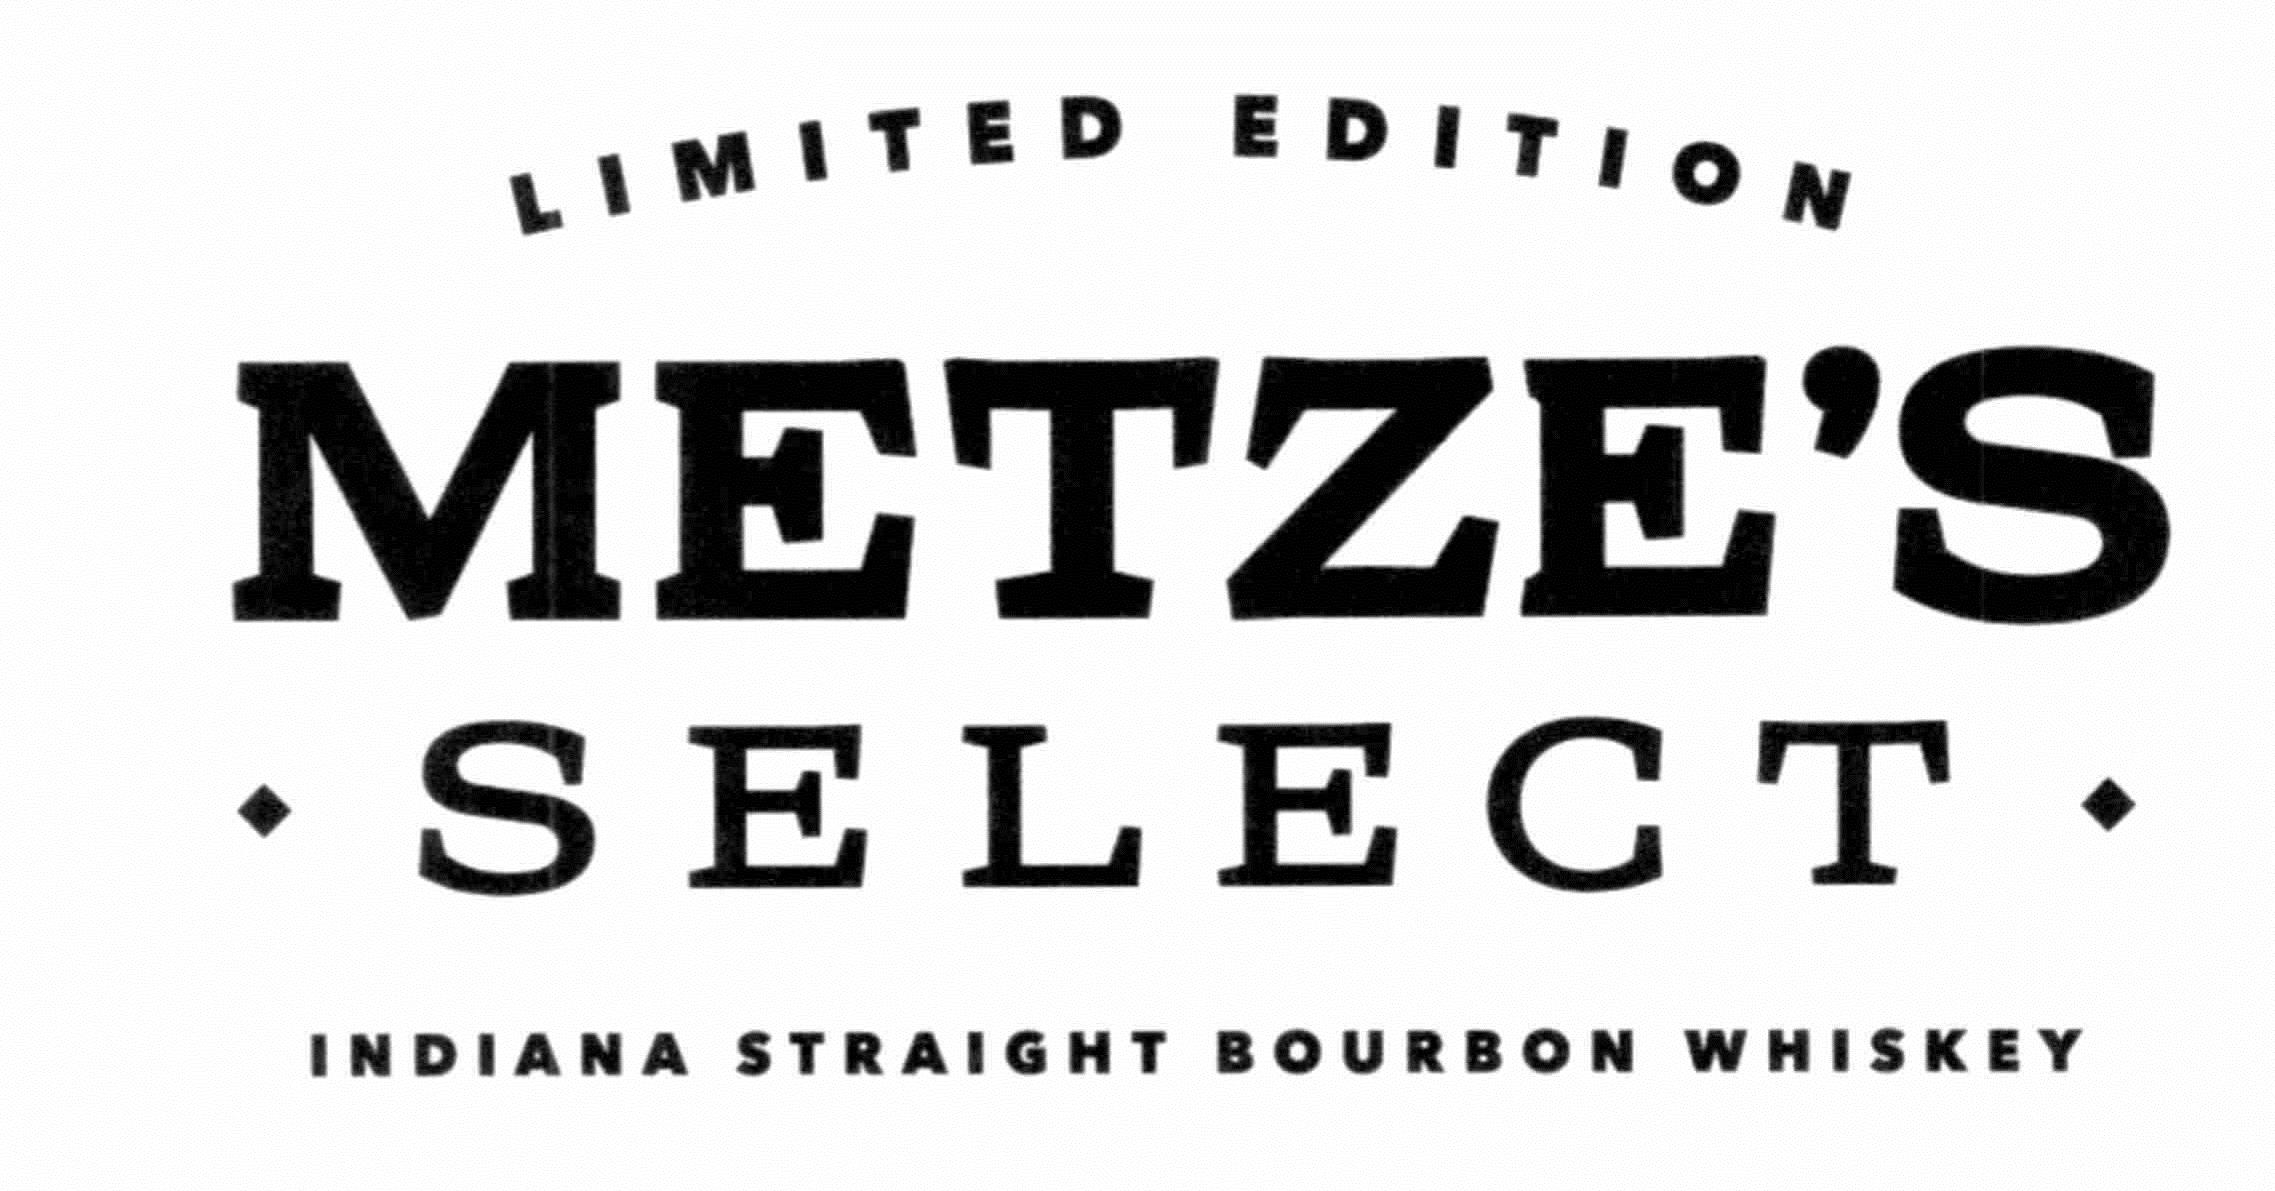  LIMITED EDITION METZE'S SELECT INDIANA STRAIGHT BOURBON WHISKEY